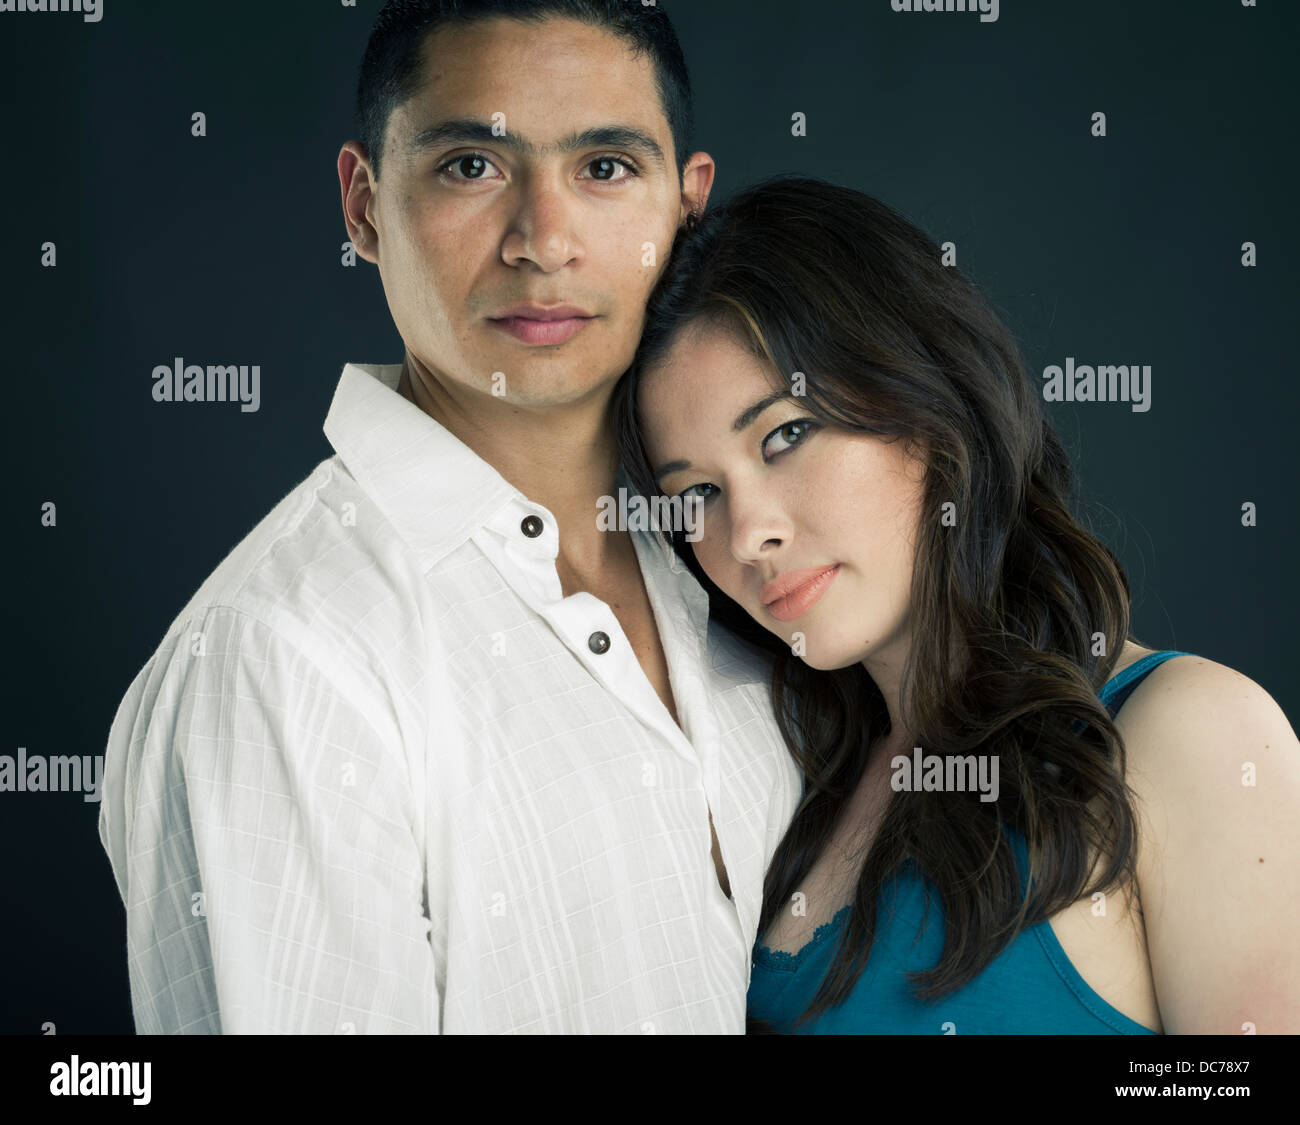 Mixed race Beautiful Couple asian american woman resting head on latino mans chest / shoulder Stock Photo